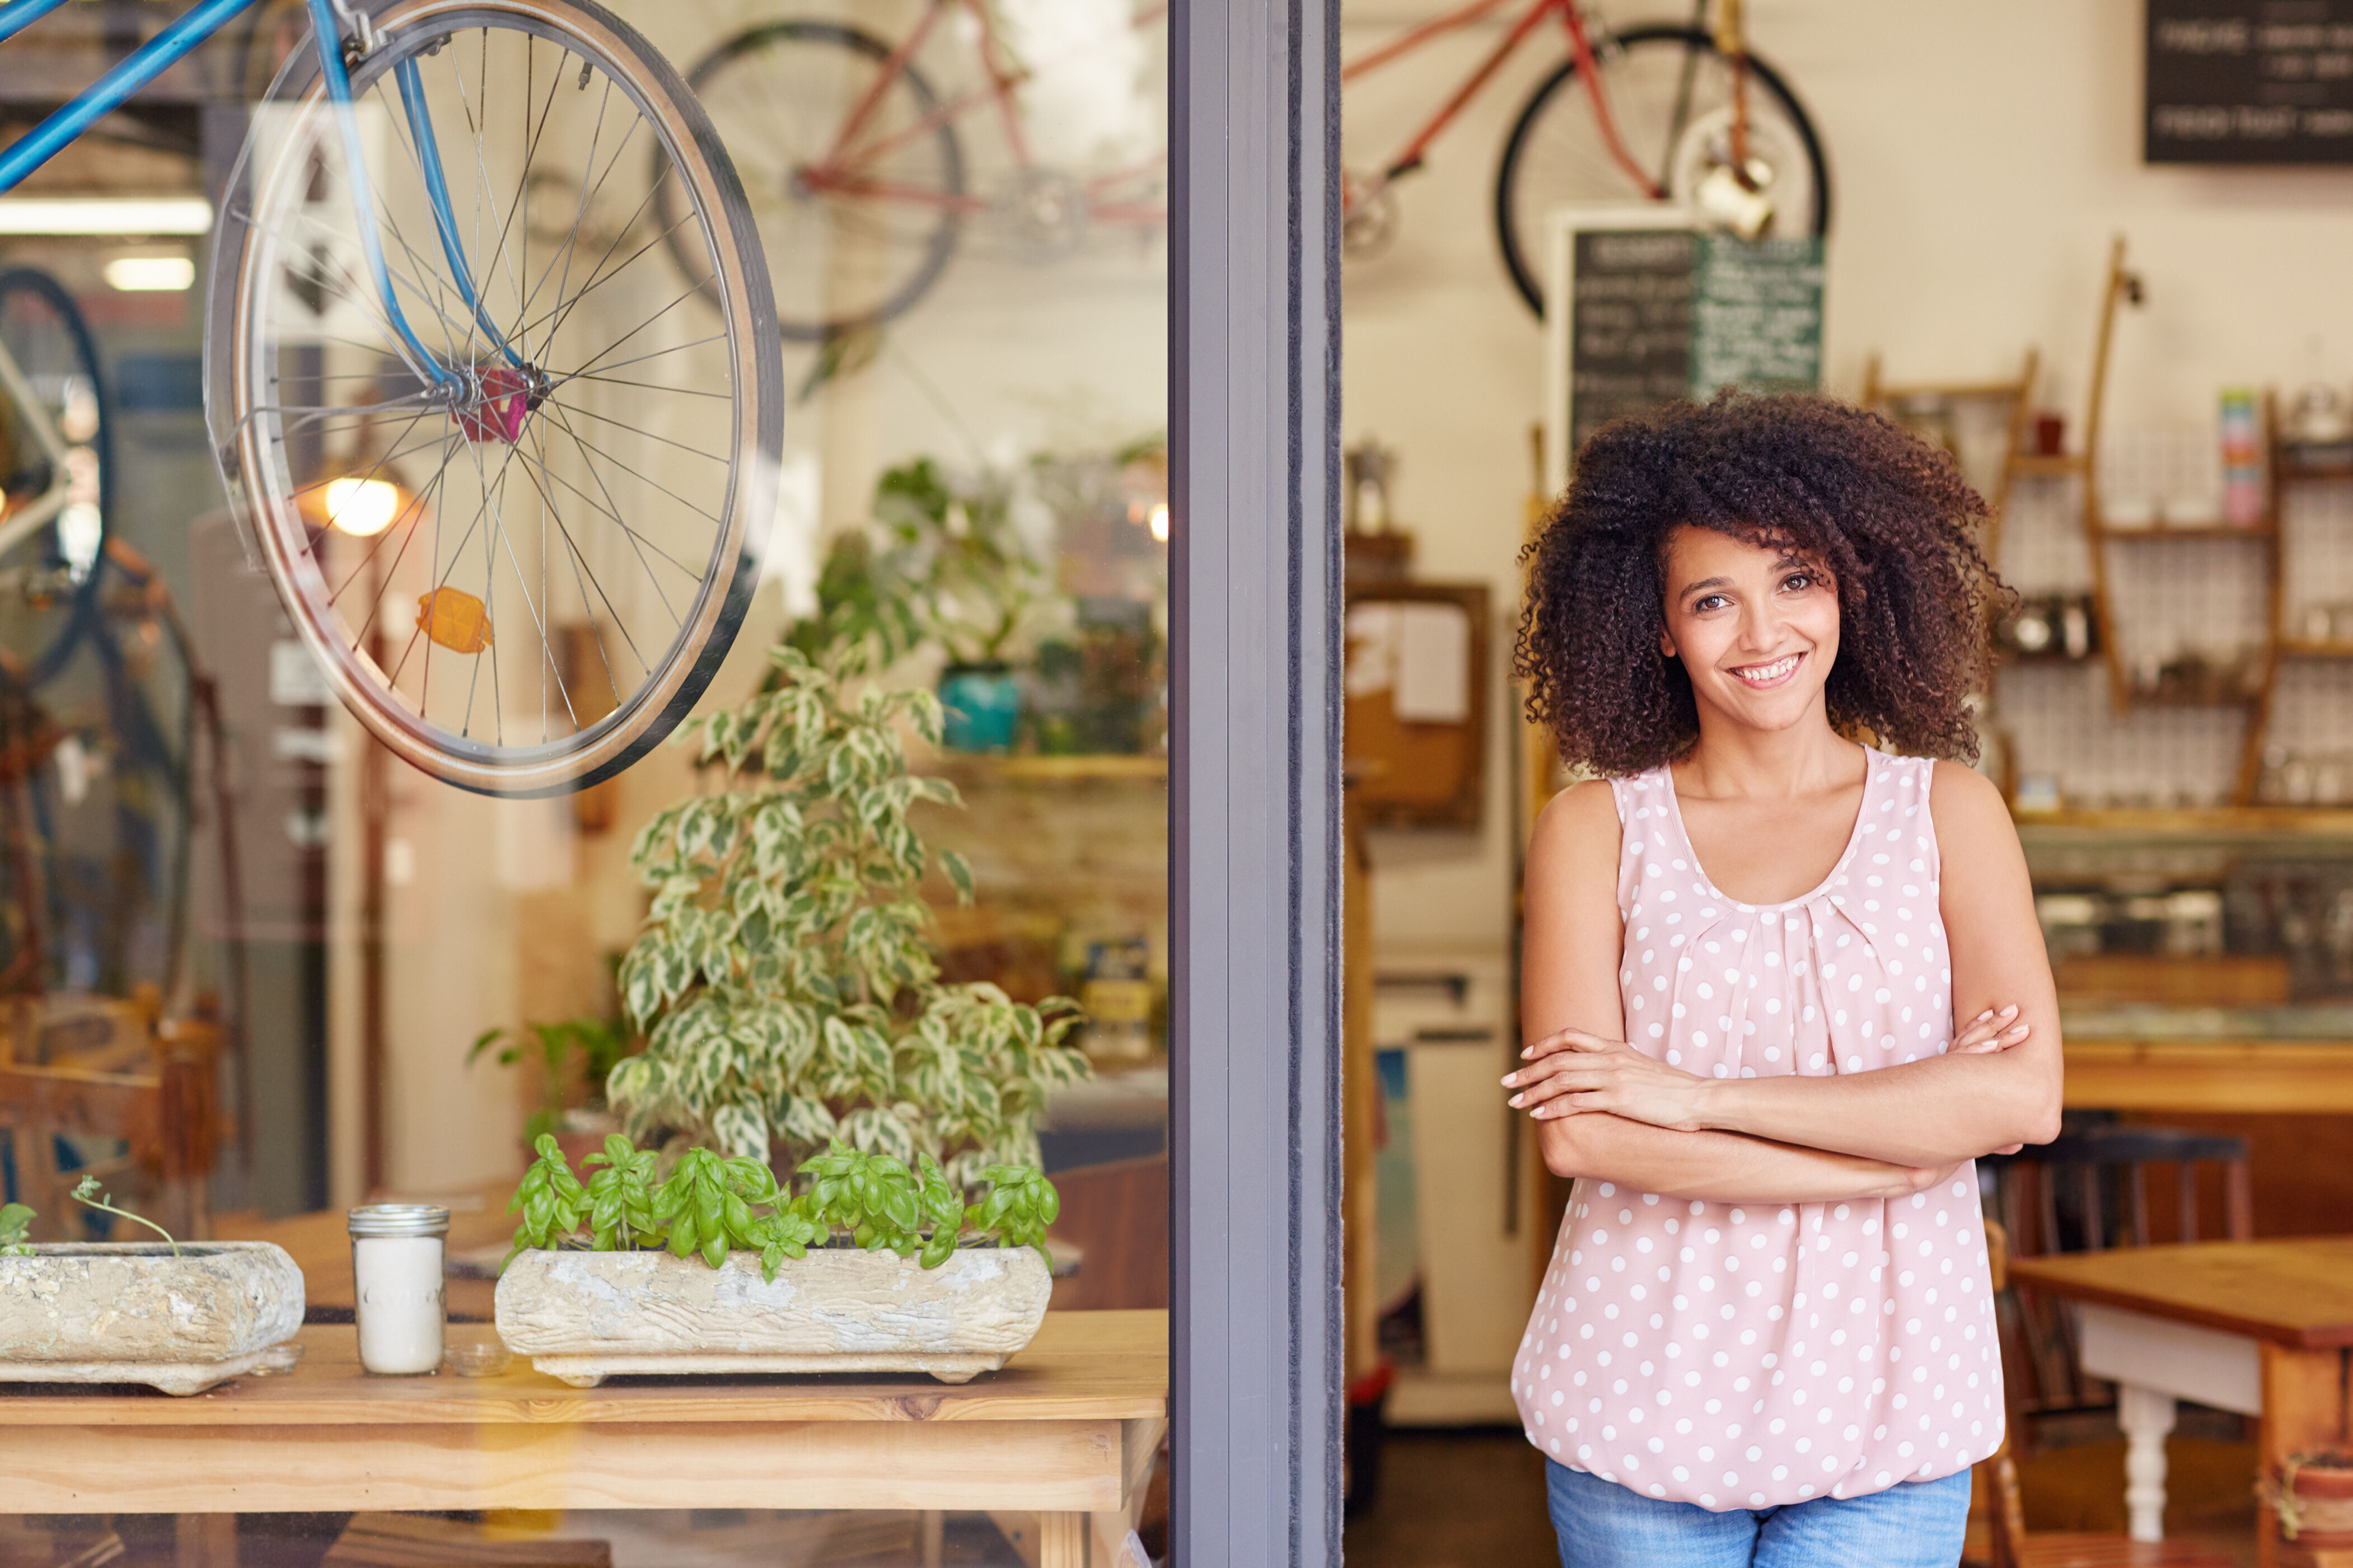 young woman standing in the doorway of a cute shop with plants in the window smiling with arms folded in front of her